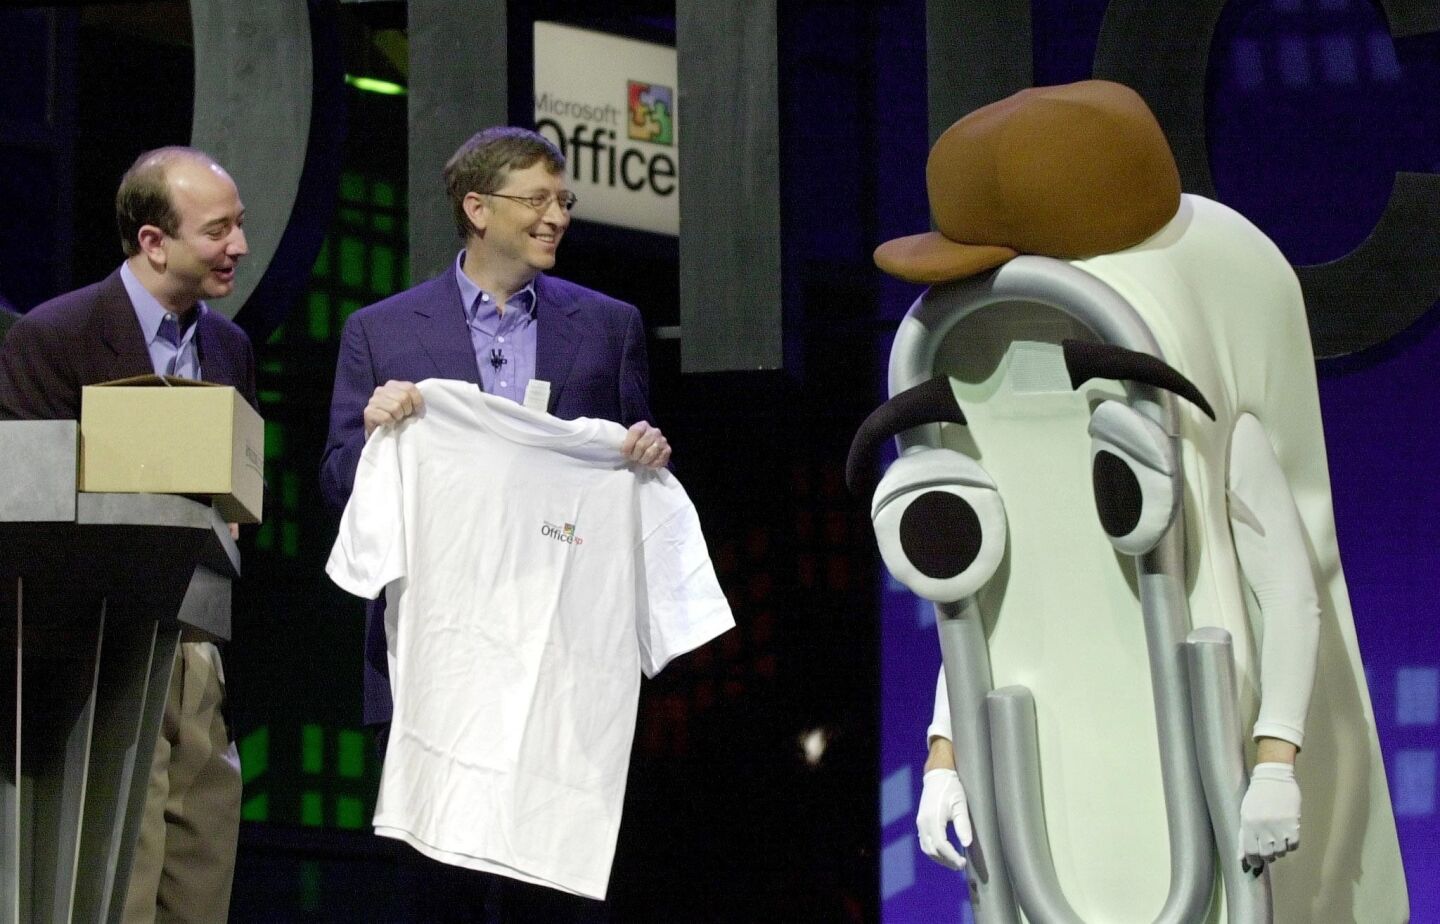 Microsoft CEO Bill Gates presents a T-shirt as a retirement gift to "Clippy," a person dressed as the Microsoft Office Assistant, as Amazon.com CEO Jeff Bezos looks on at the Office XP launch, May 31, 2001, in New York.